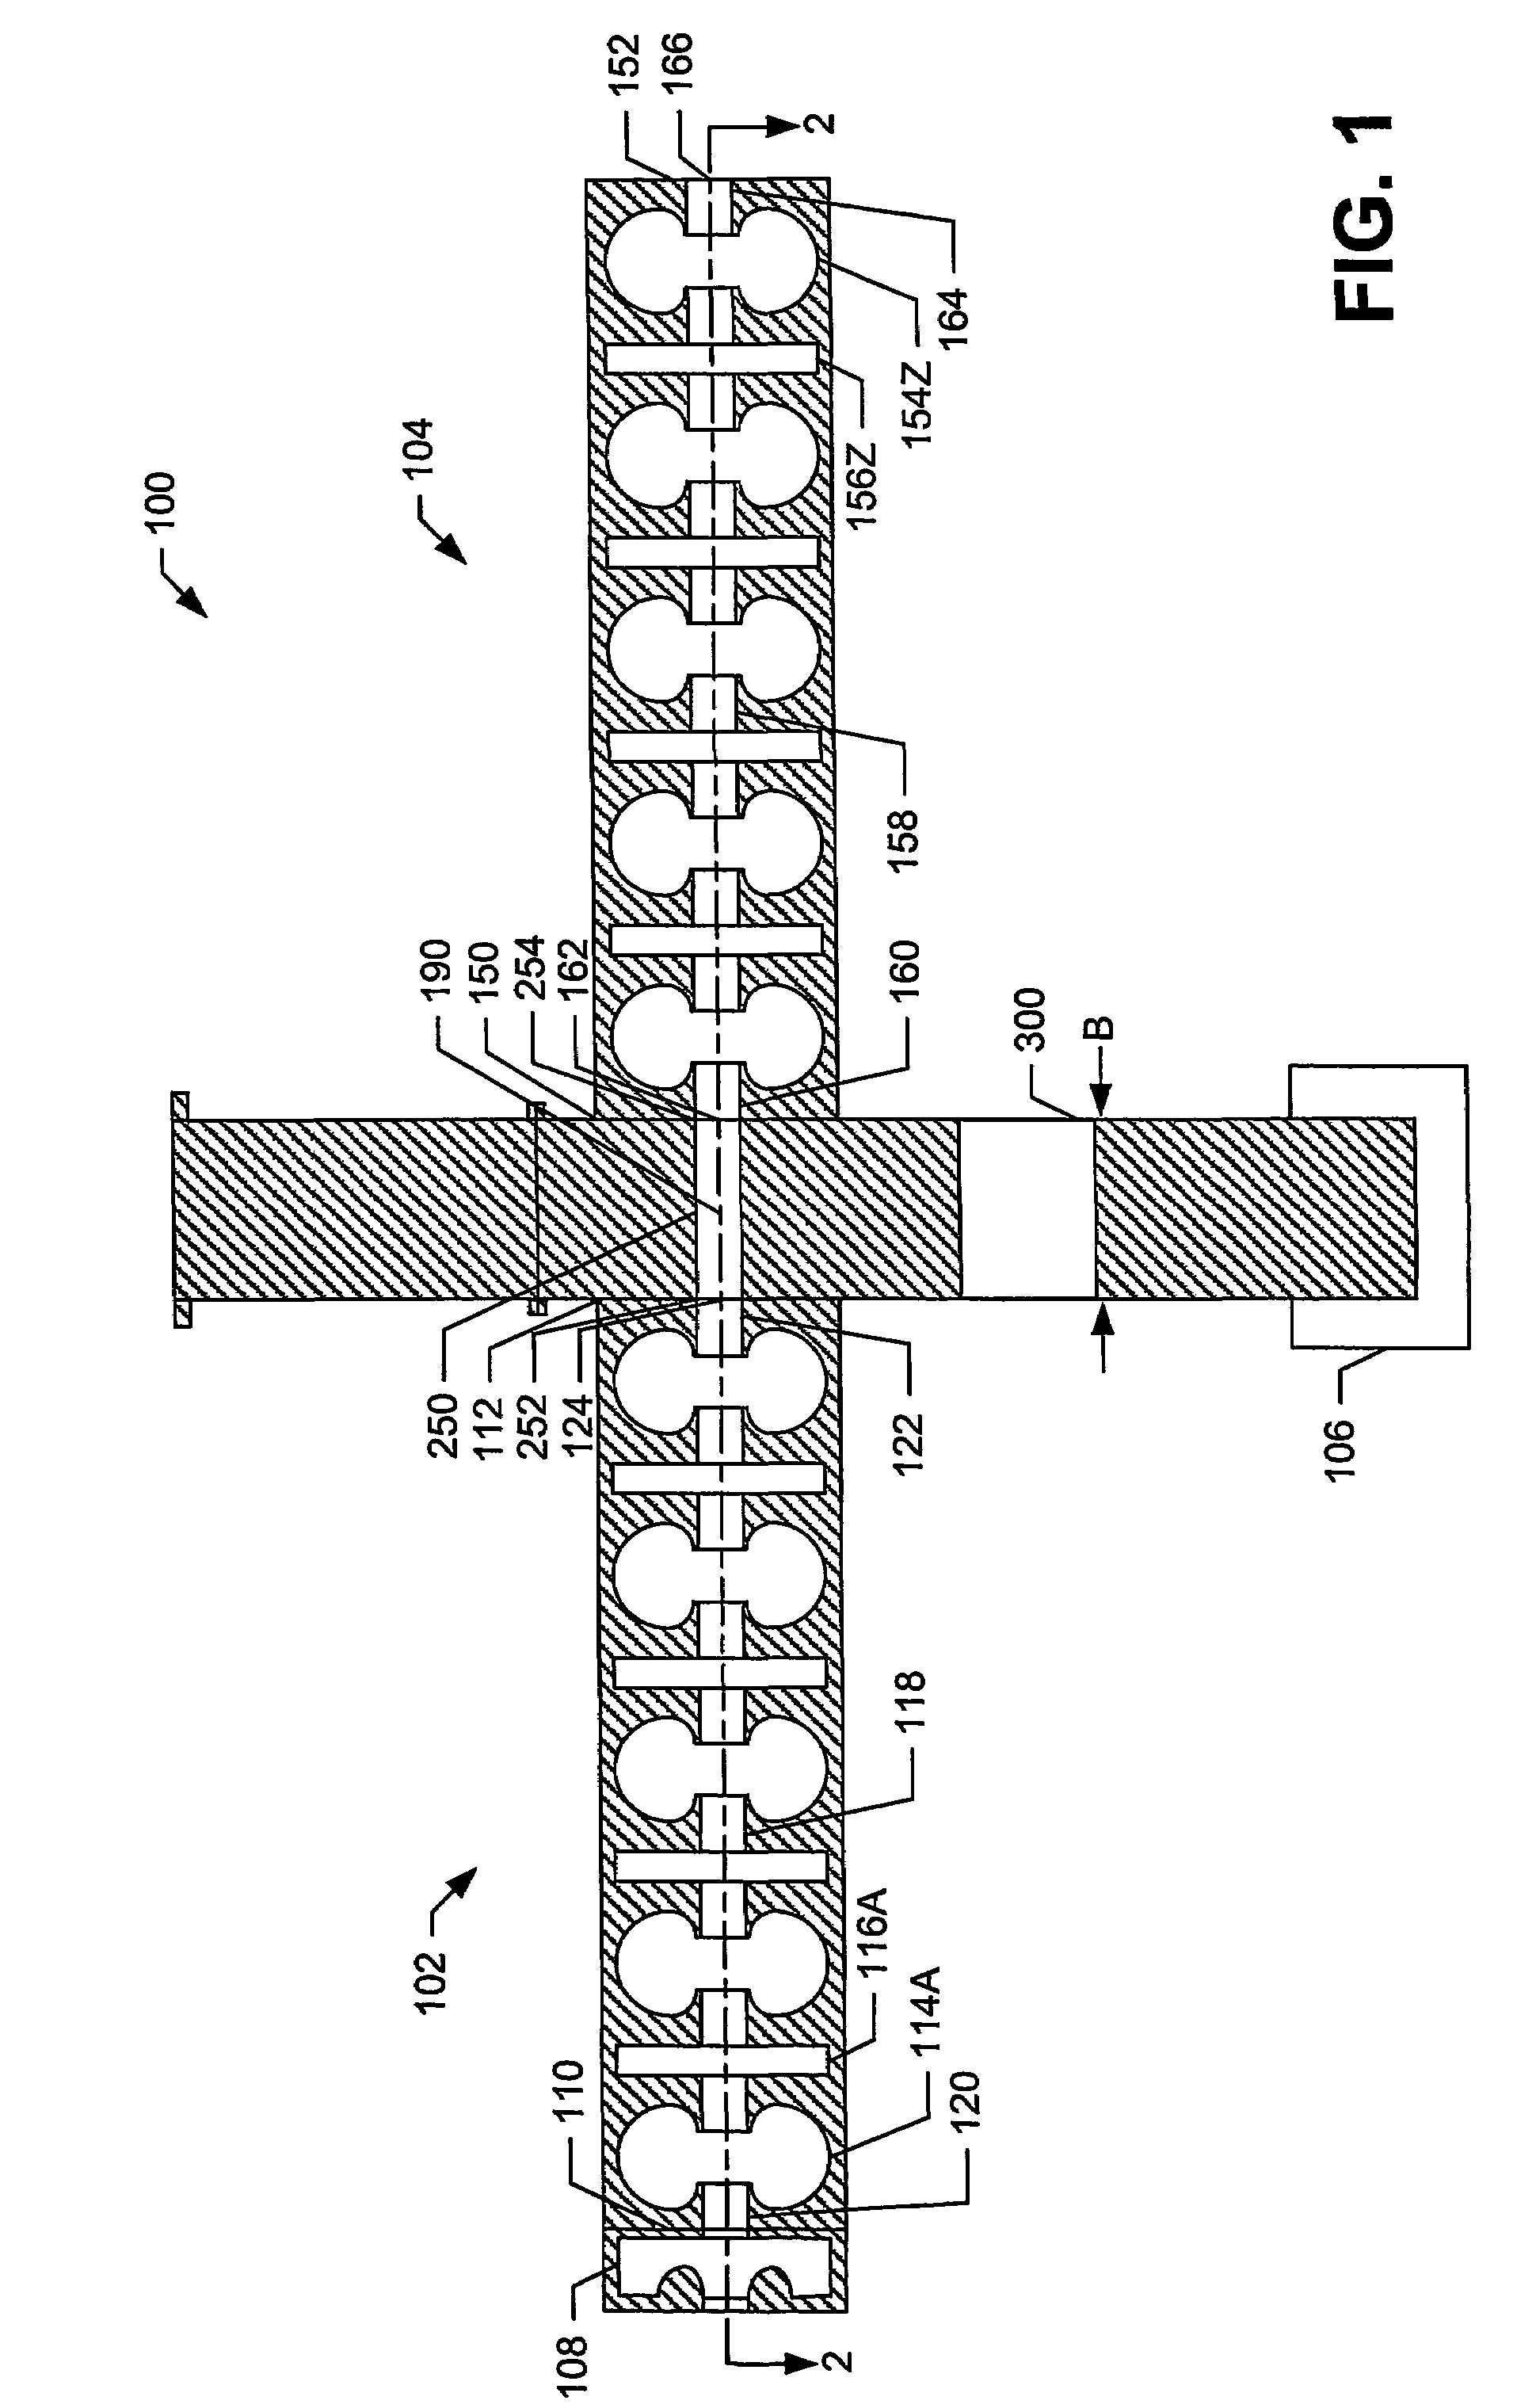 Multi-section particle accelerator with controlled beam current